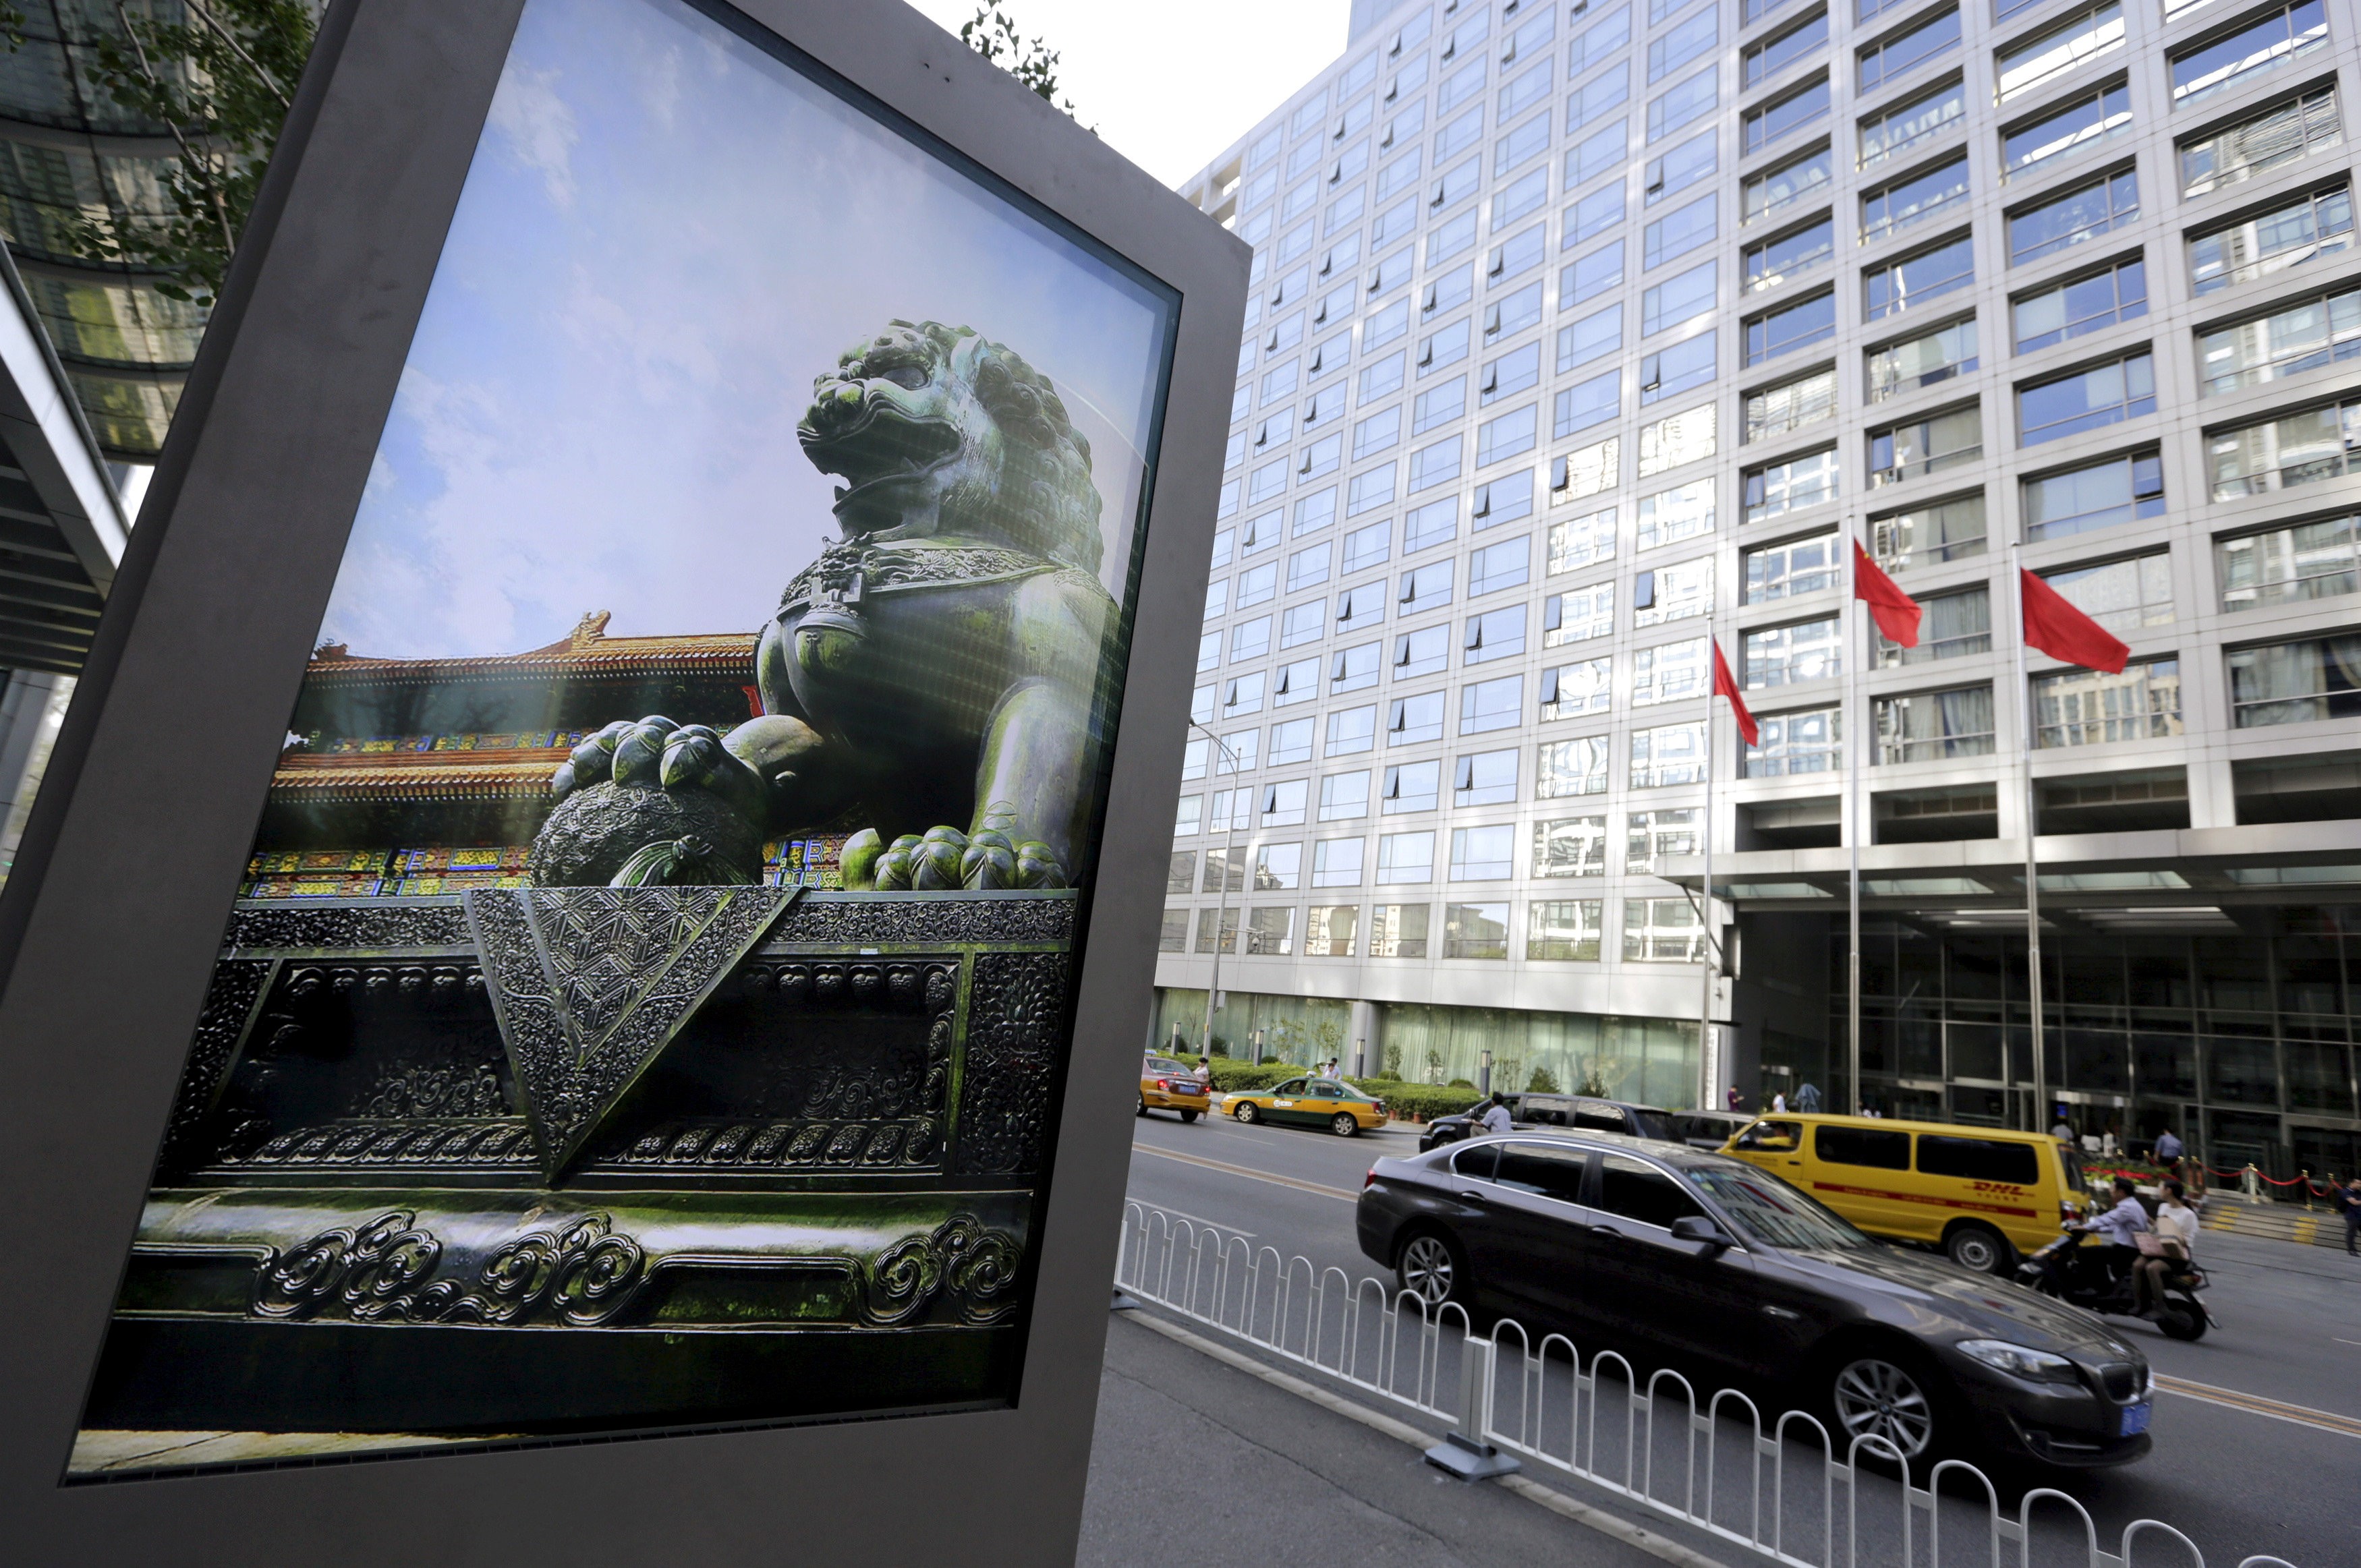 An advertising board showing a Chinese stone lion is pictured near an entrance to the headquarters (R) of China Securities Regulatory Commission (CSRC), in Beijing, China, September 7, 2015. Photo: REUTERS/Jason Lee/File Photo